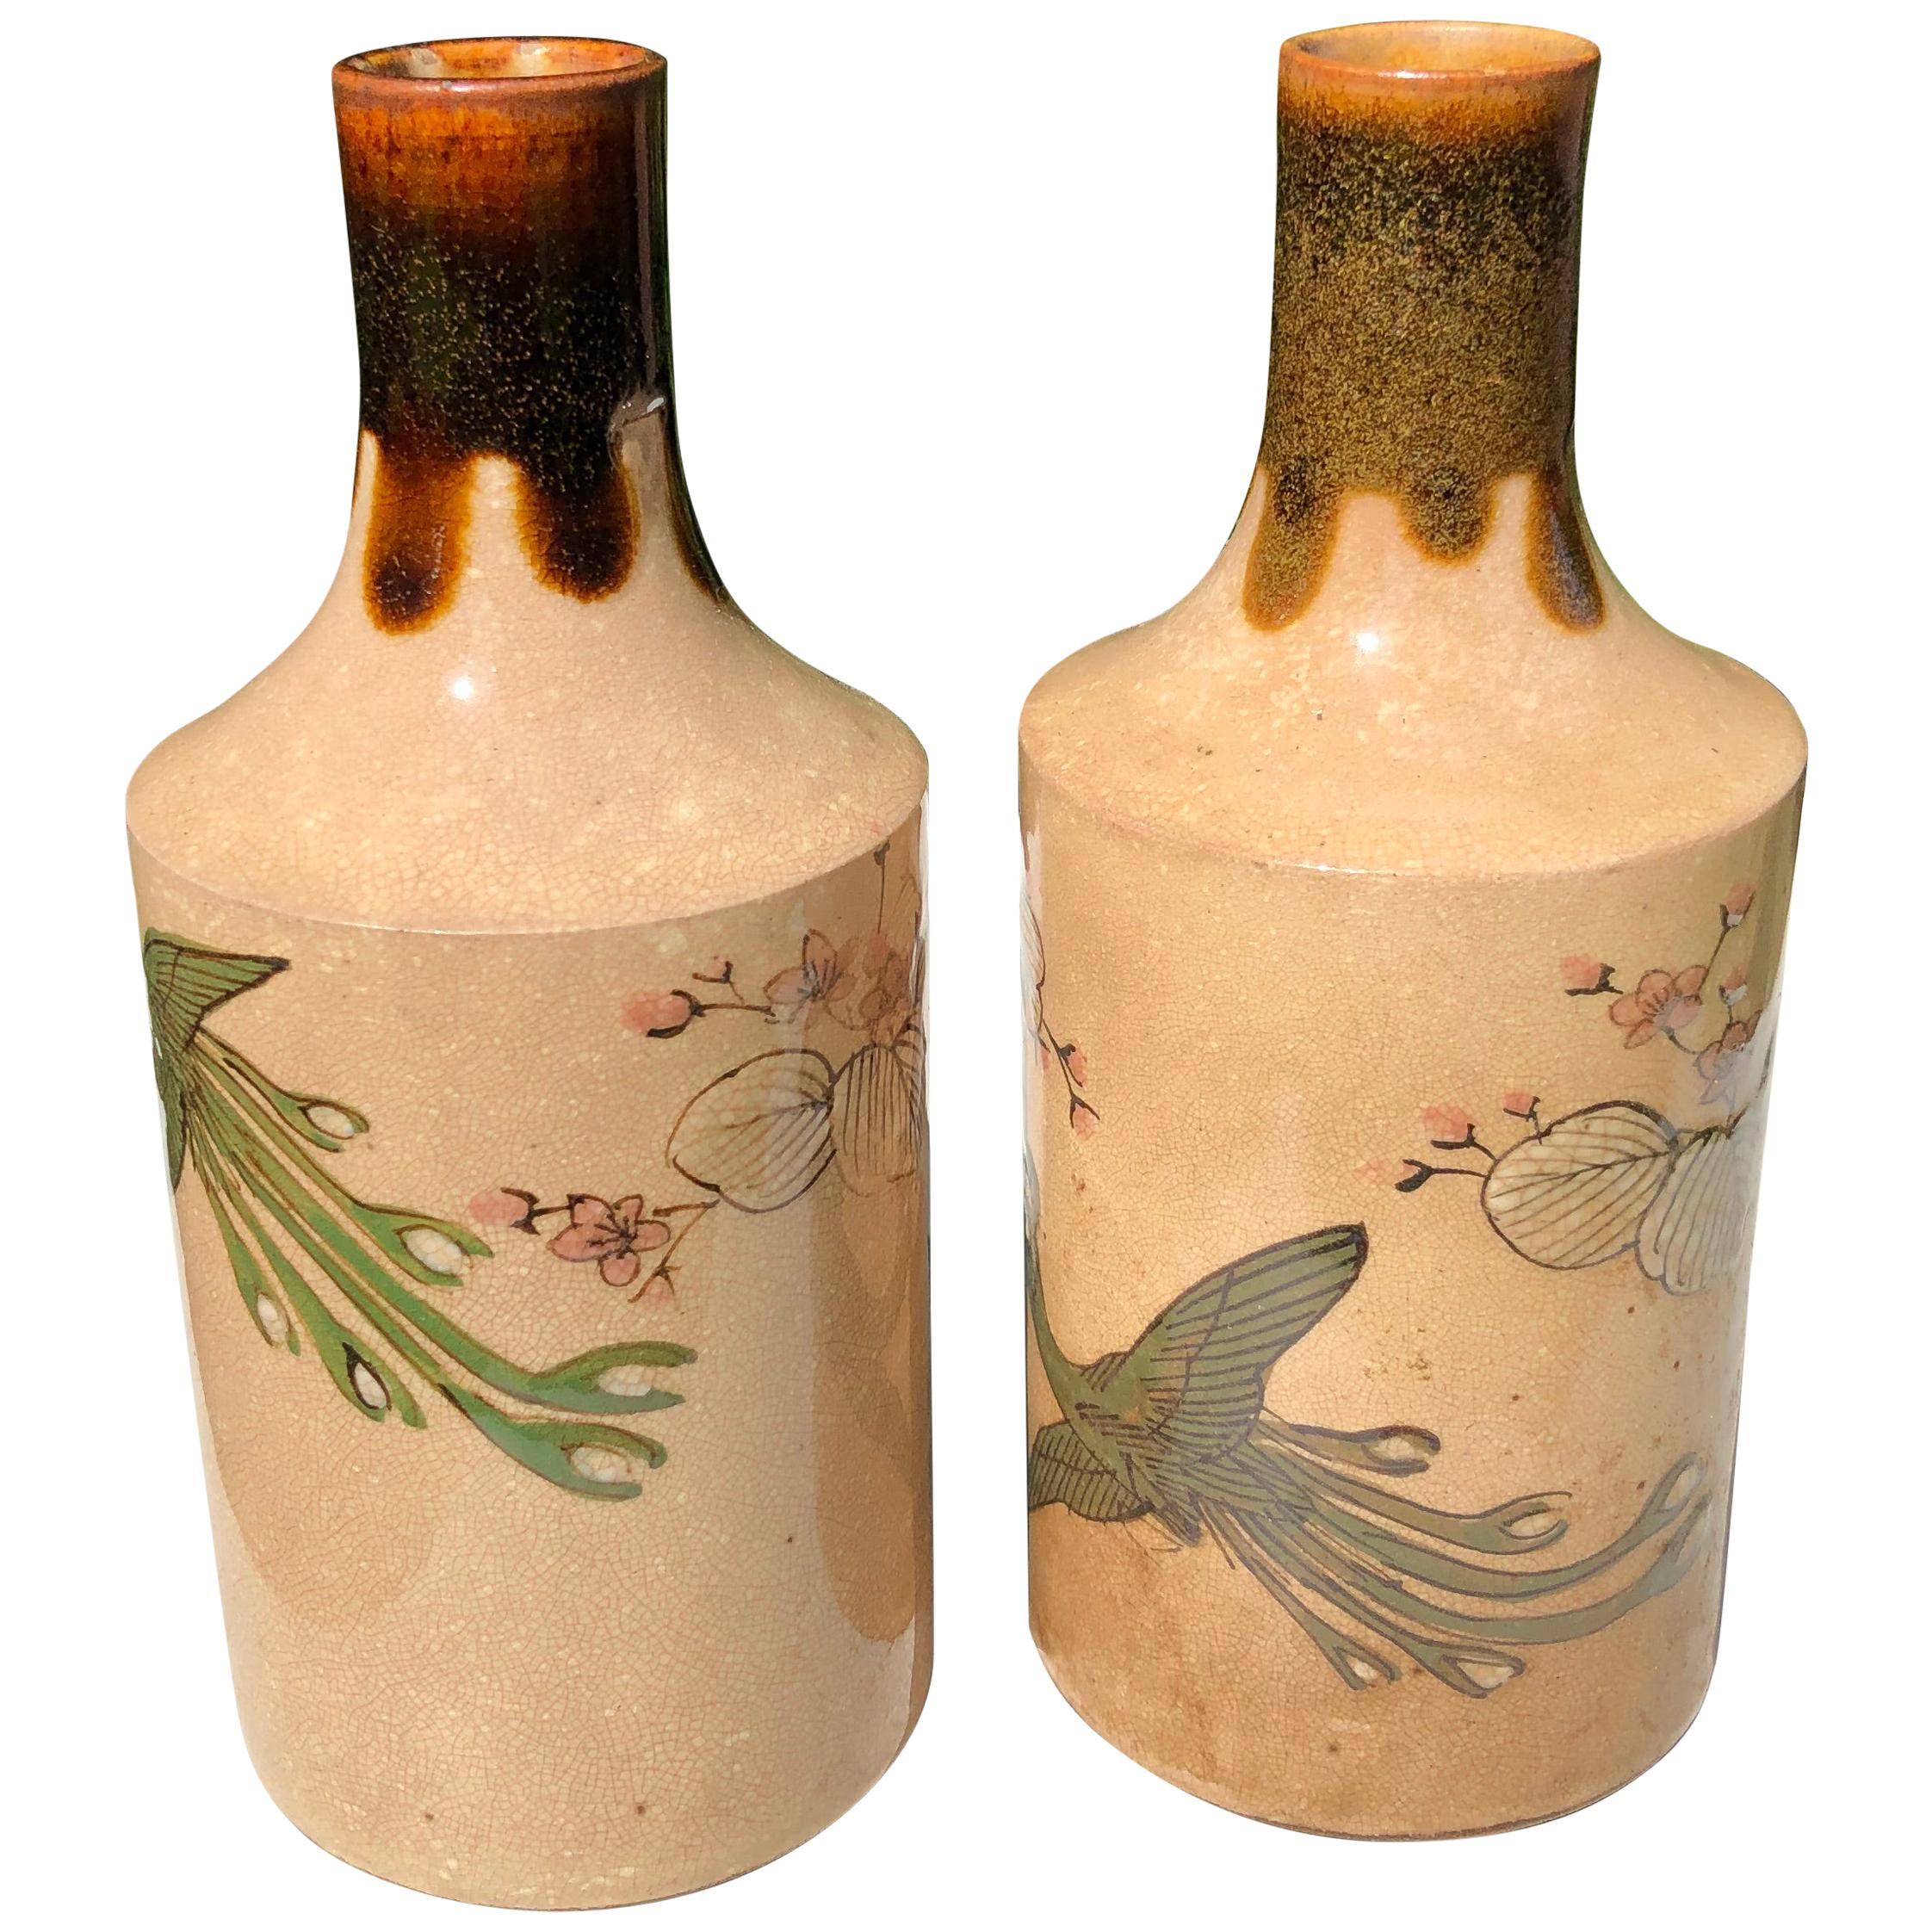 Japanese Fine Hand Painted Sake Bottles "Bird Of Paradise" Collector Boxed, Pair